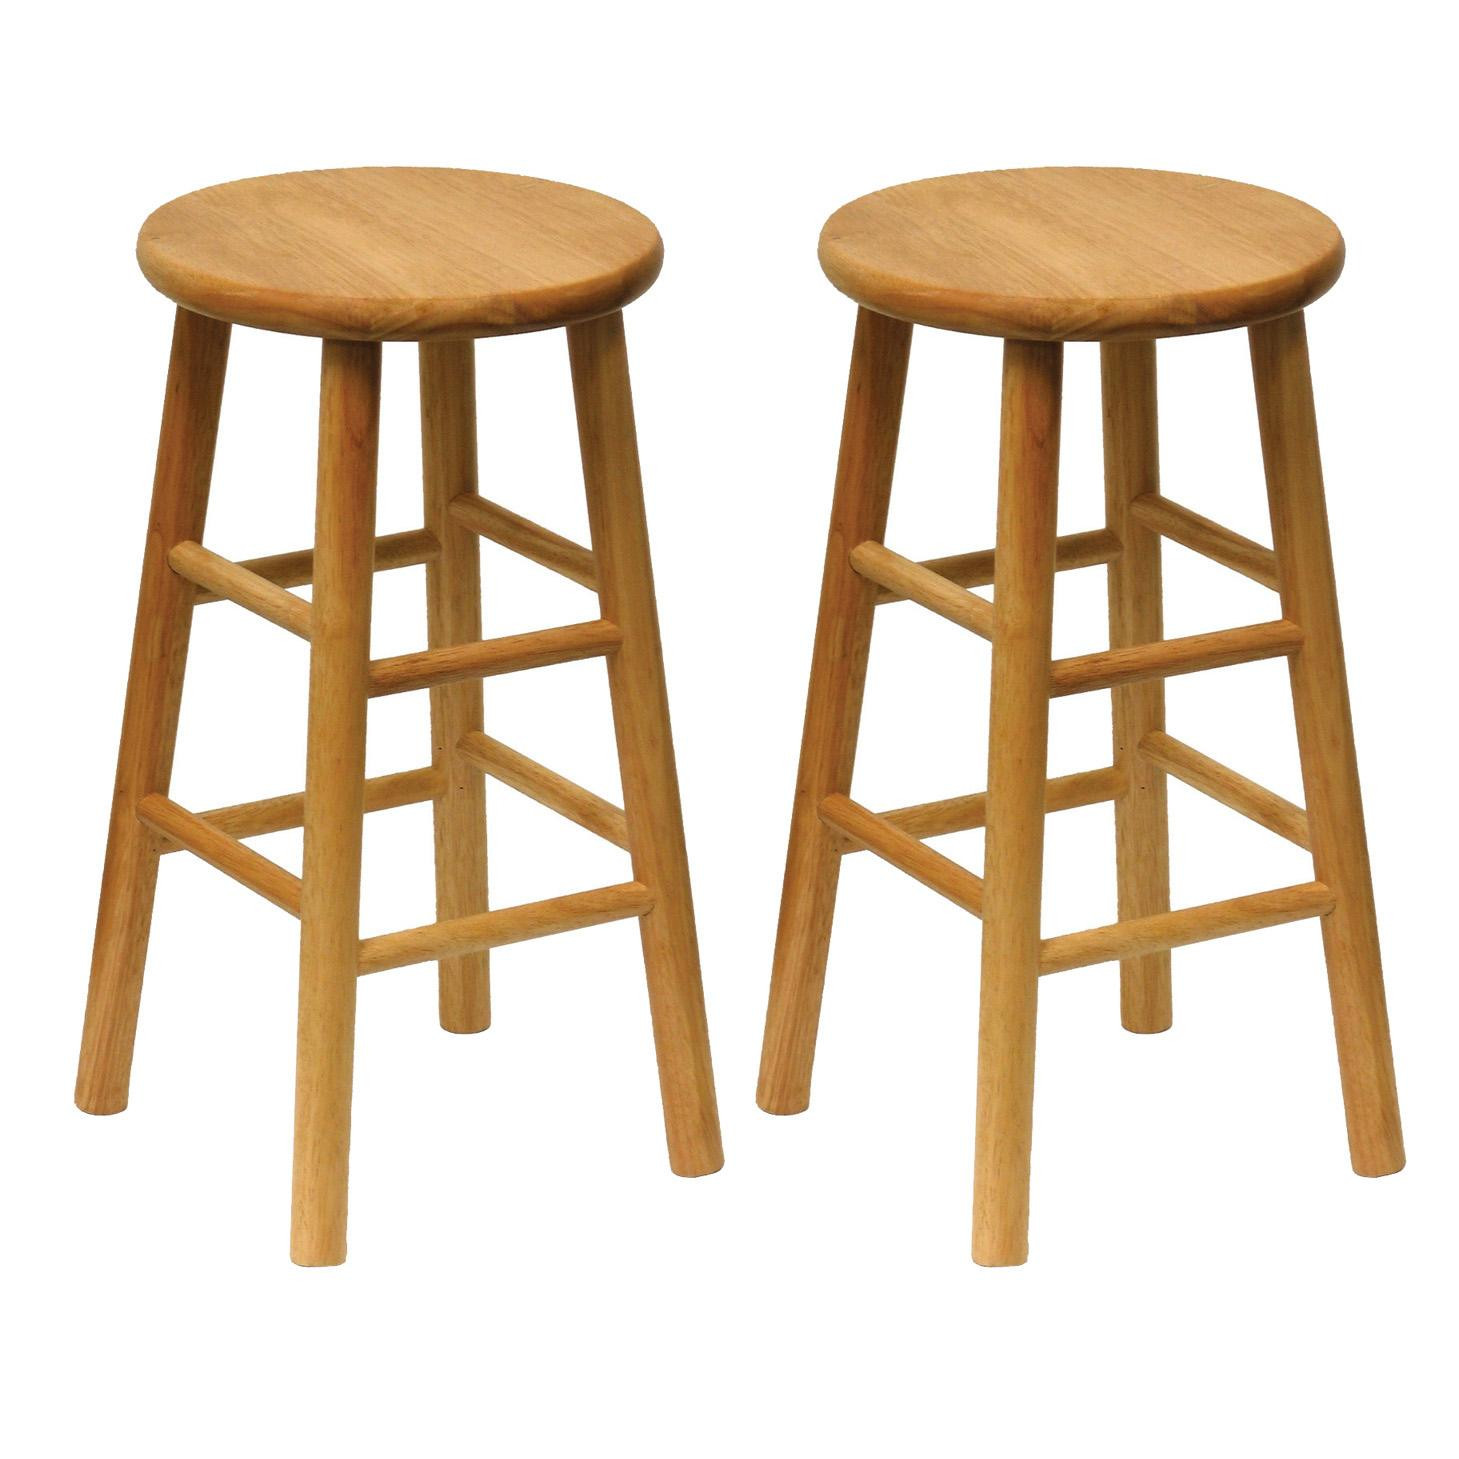 Kitchen Counter Bar Stool
 Winsome Wood Wood 24 Inch Counter Stools Set of 2